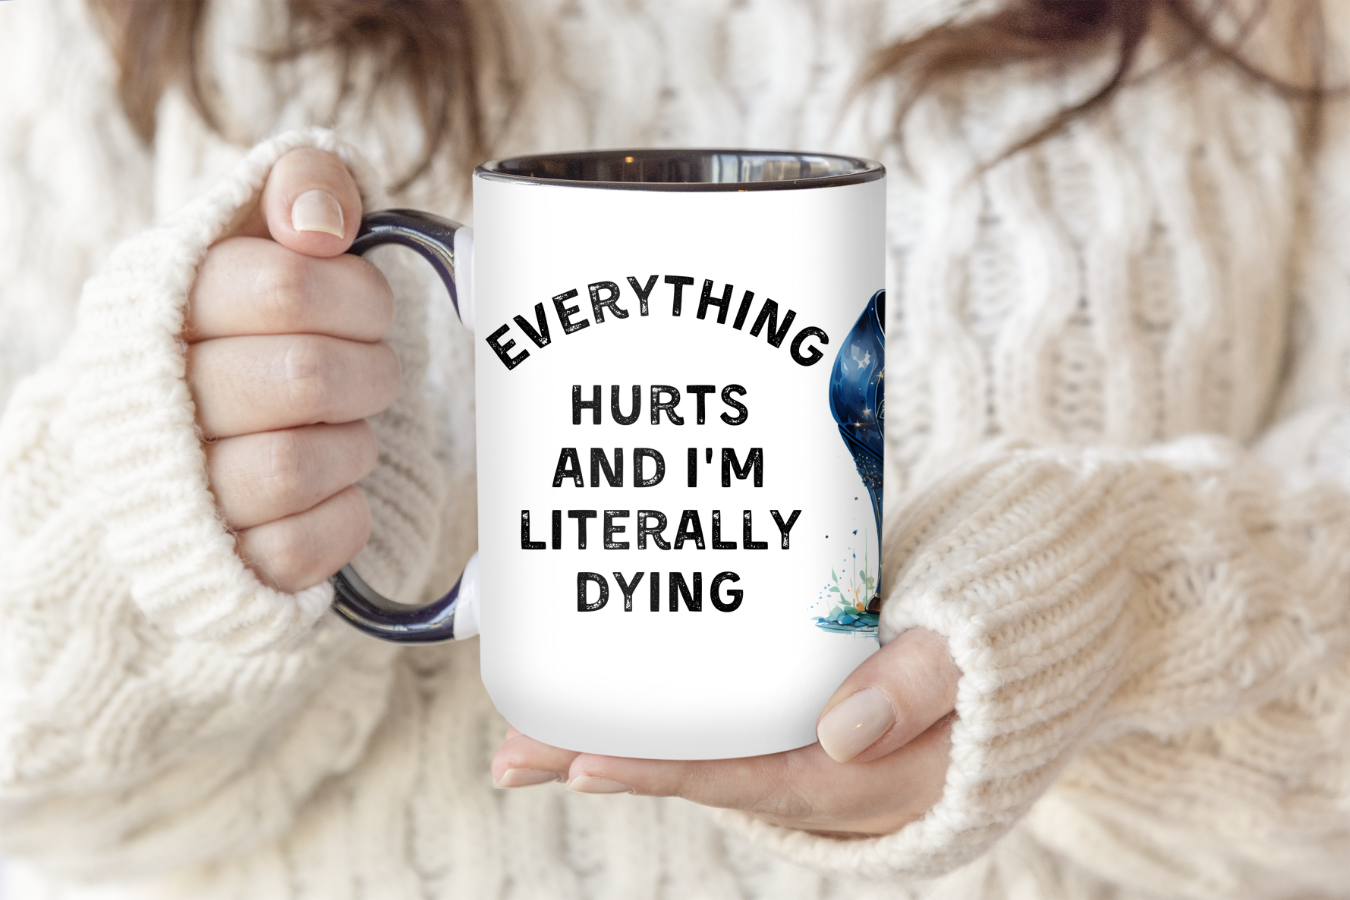 Everything Hurts And I'm Literally Dying | Mug - The Pretty Things.ca